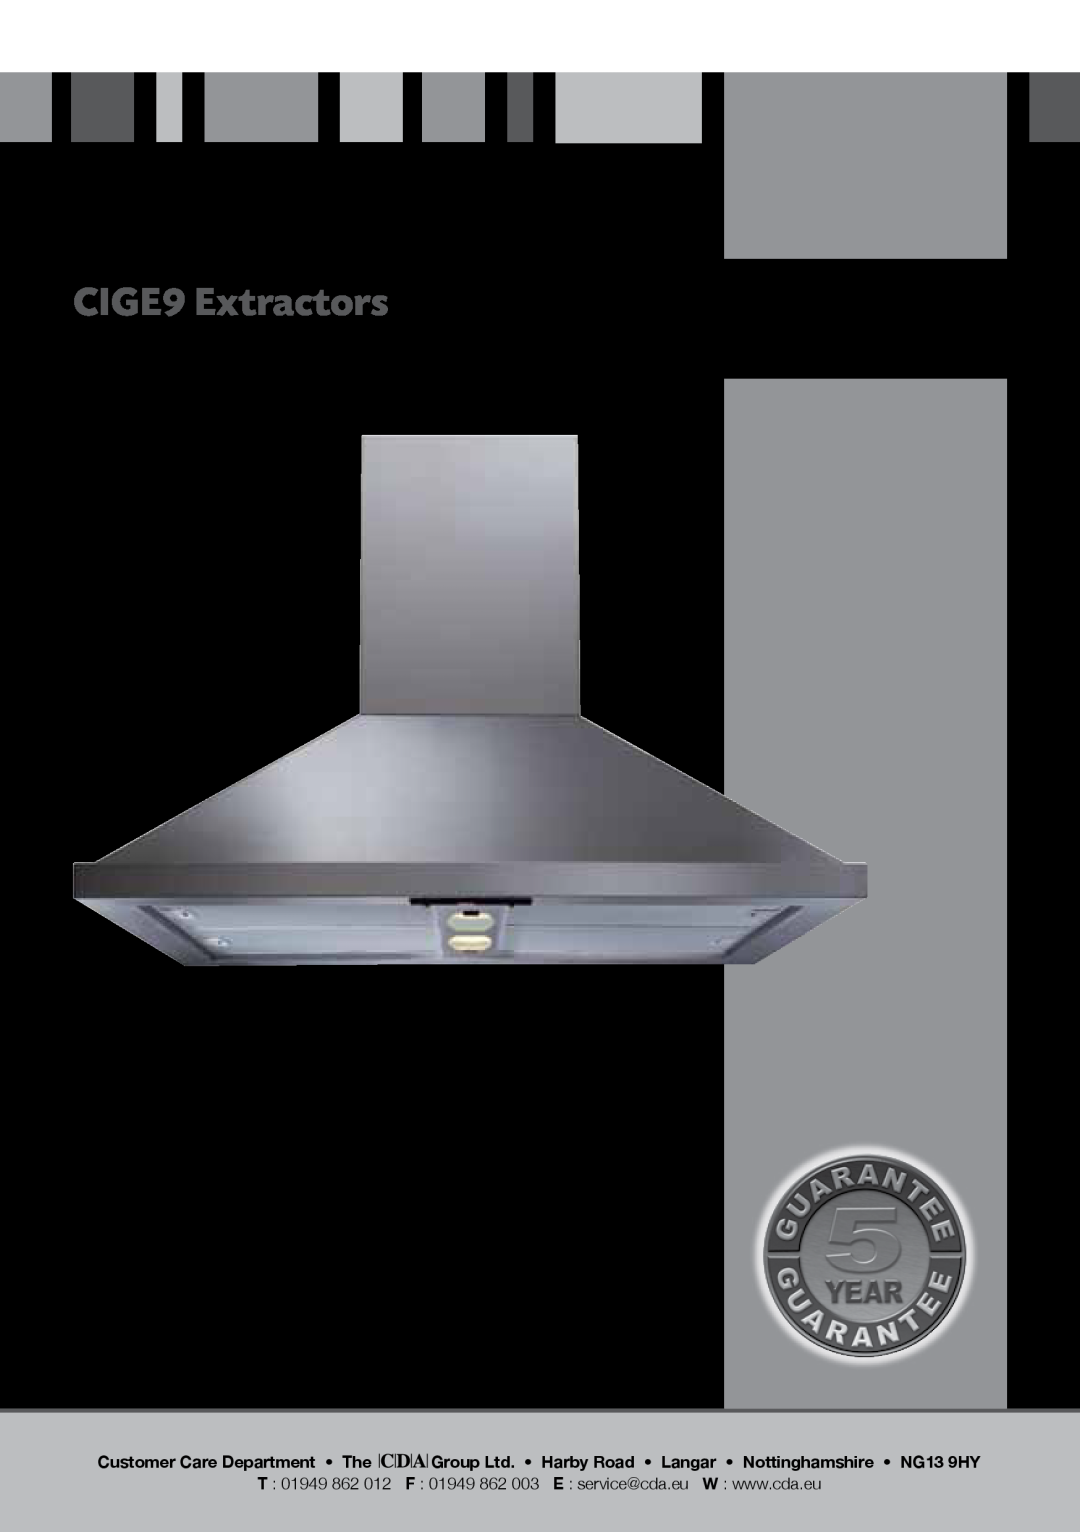 CDA manual CIGE9 Extractors, Manual for Installation, Use and Maintenance 